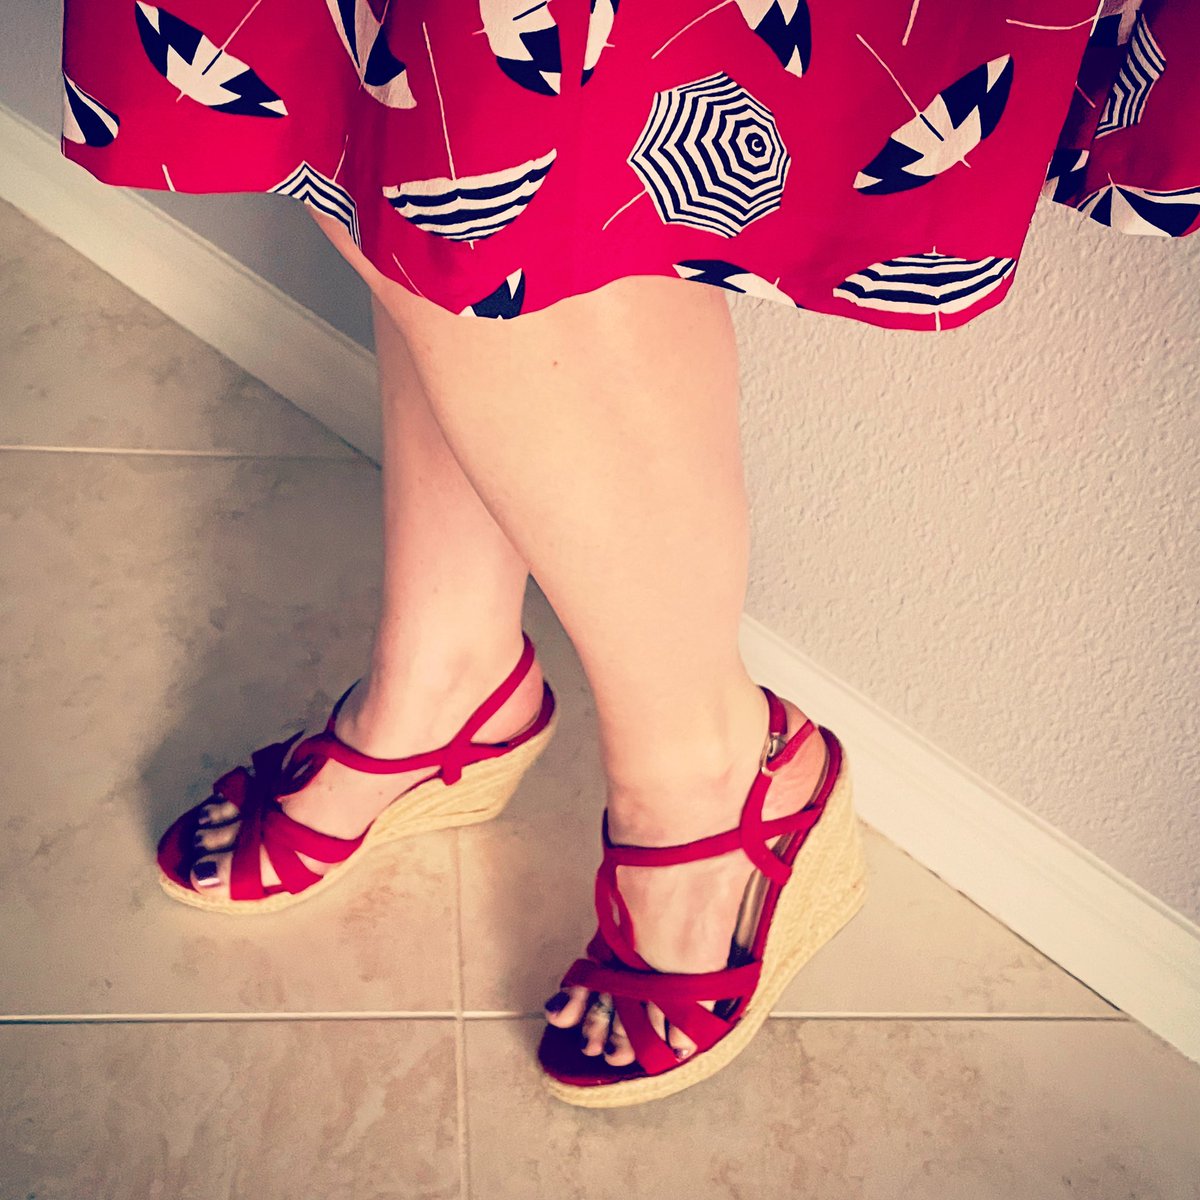 Thank goodness my #fashionadvisor picked out my #shoes this week, and today’s @talbotsofficial dress, to have less decisions to make. #redwedges #wedgelover #shoelove365 #shoes #shoelove #shoelover #shoeaddict #shoecollector #shoecollection #shoefie #shoefiequeen #shoeaddiction